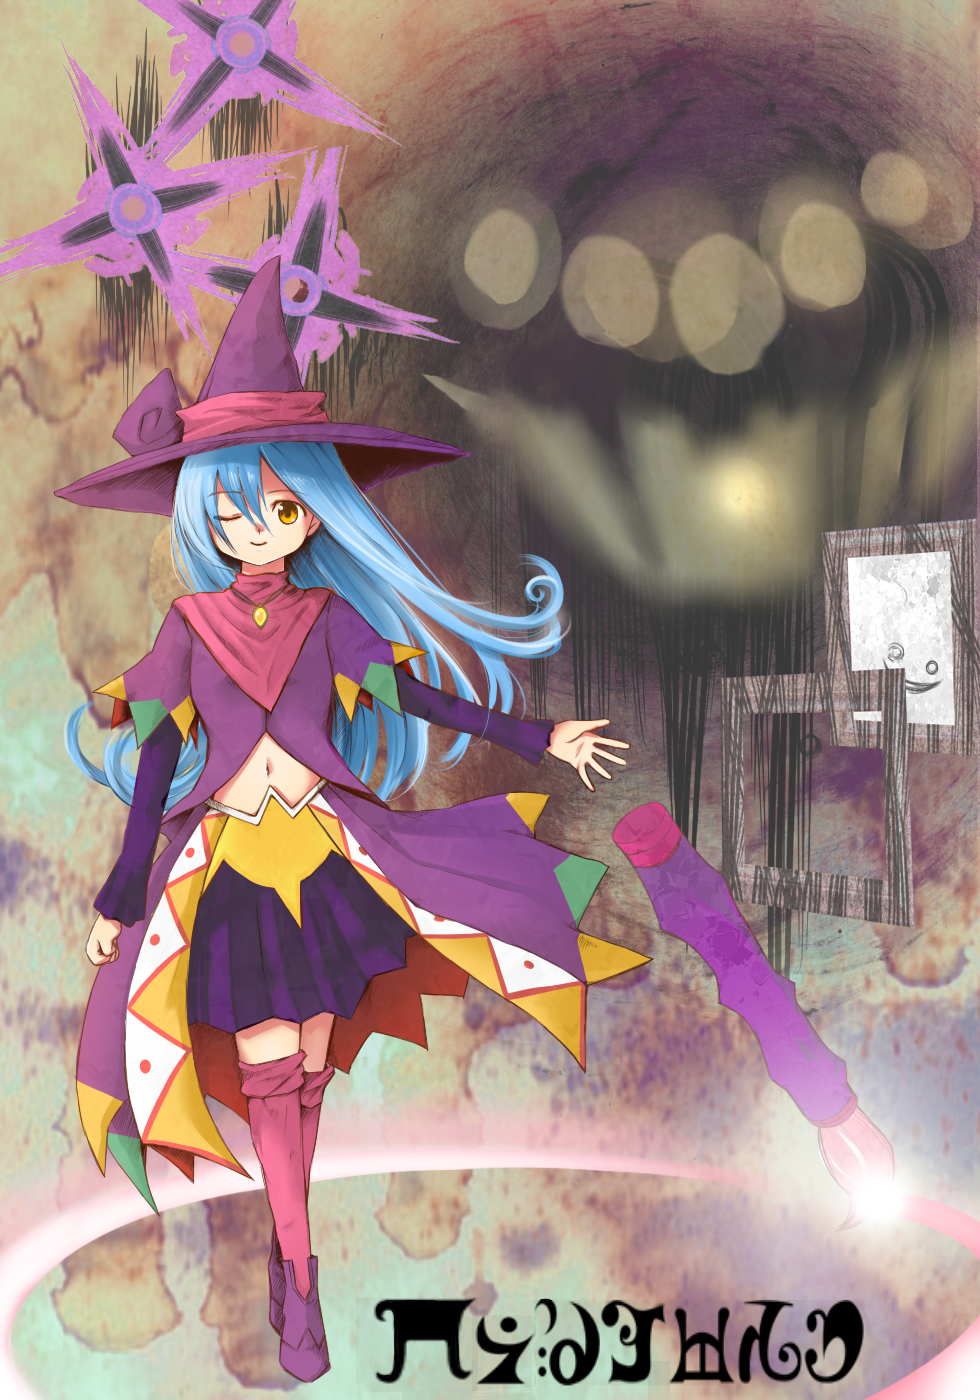 1girl ;) abstract_background blue_hair character_name commentary_request crossover drawcia drawcia_soul dual_persona eyebrows_visible_through_hair fouma full_body hat highres kirby_(series) long_hair long_sleeves madoka_runes magic_circle mahou_shoujo_madoka_magica midriff navel one_eye_closed outstretched_arm paintbrush painting_(object) parody personification pink_legwear purple_footwear purple_skirt robe skirt smile style_parody trait_connection translated witch witch_(madoka_magica) witch_hat yellow_eyes